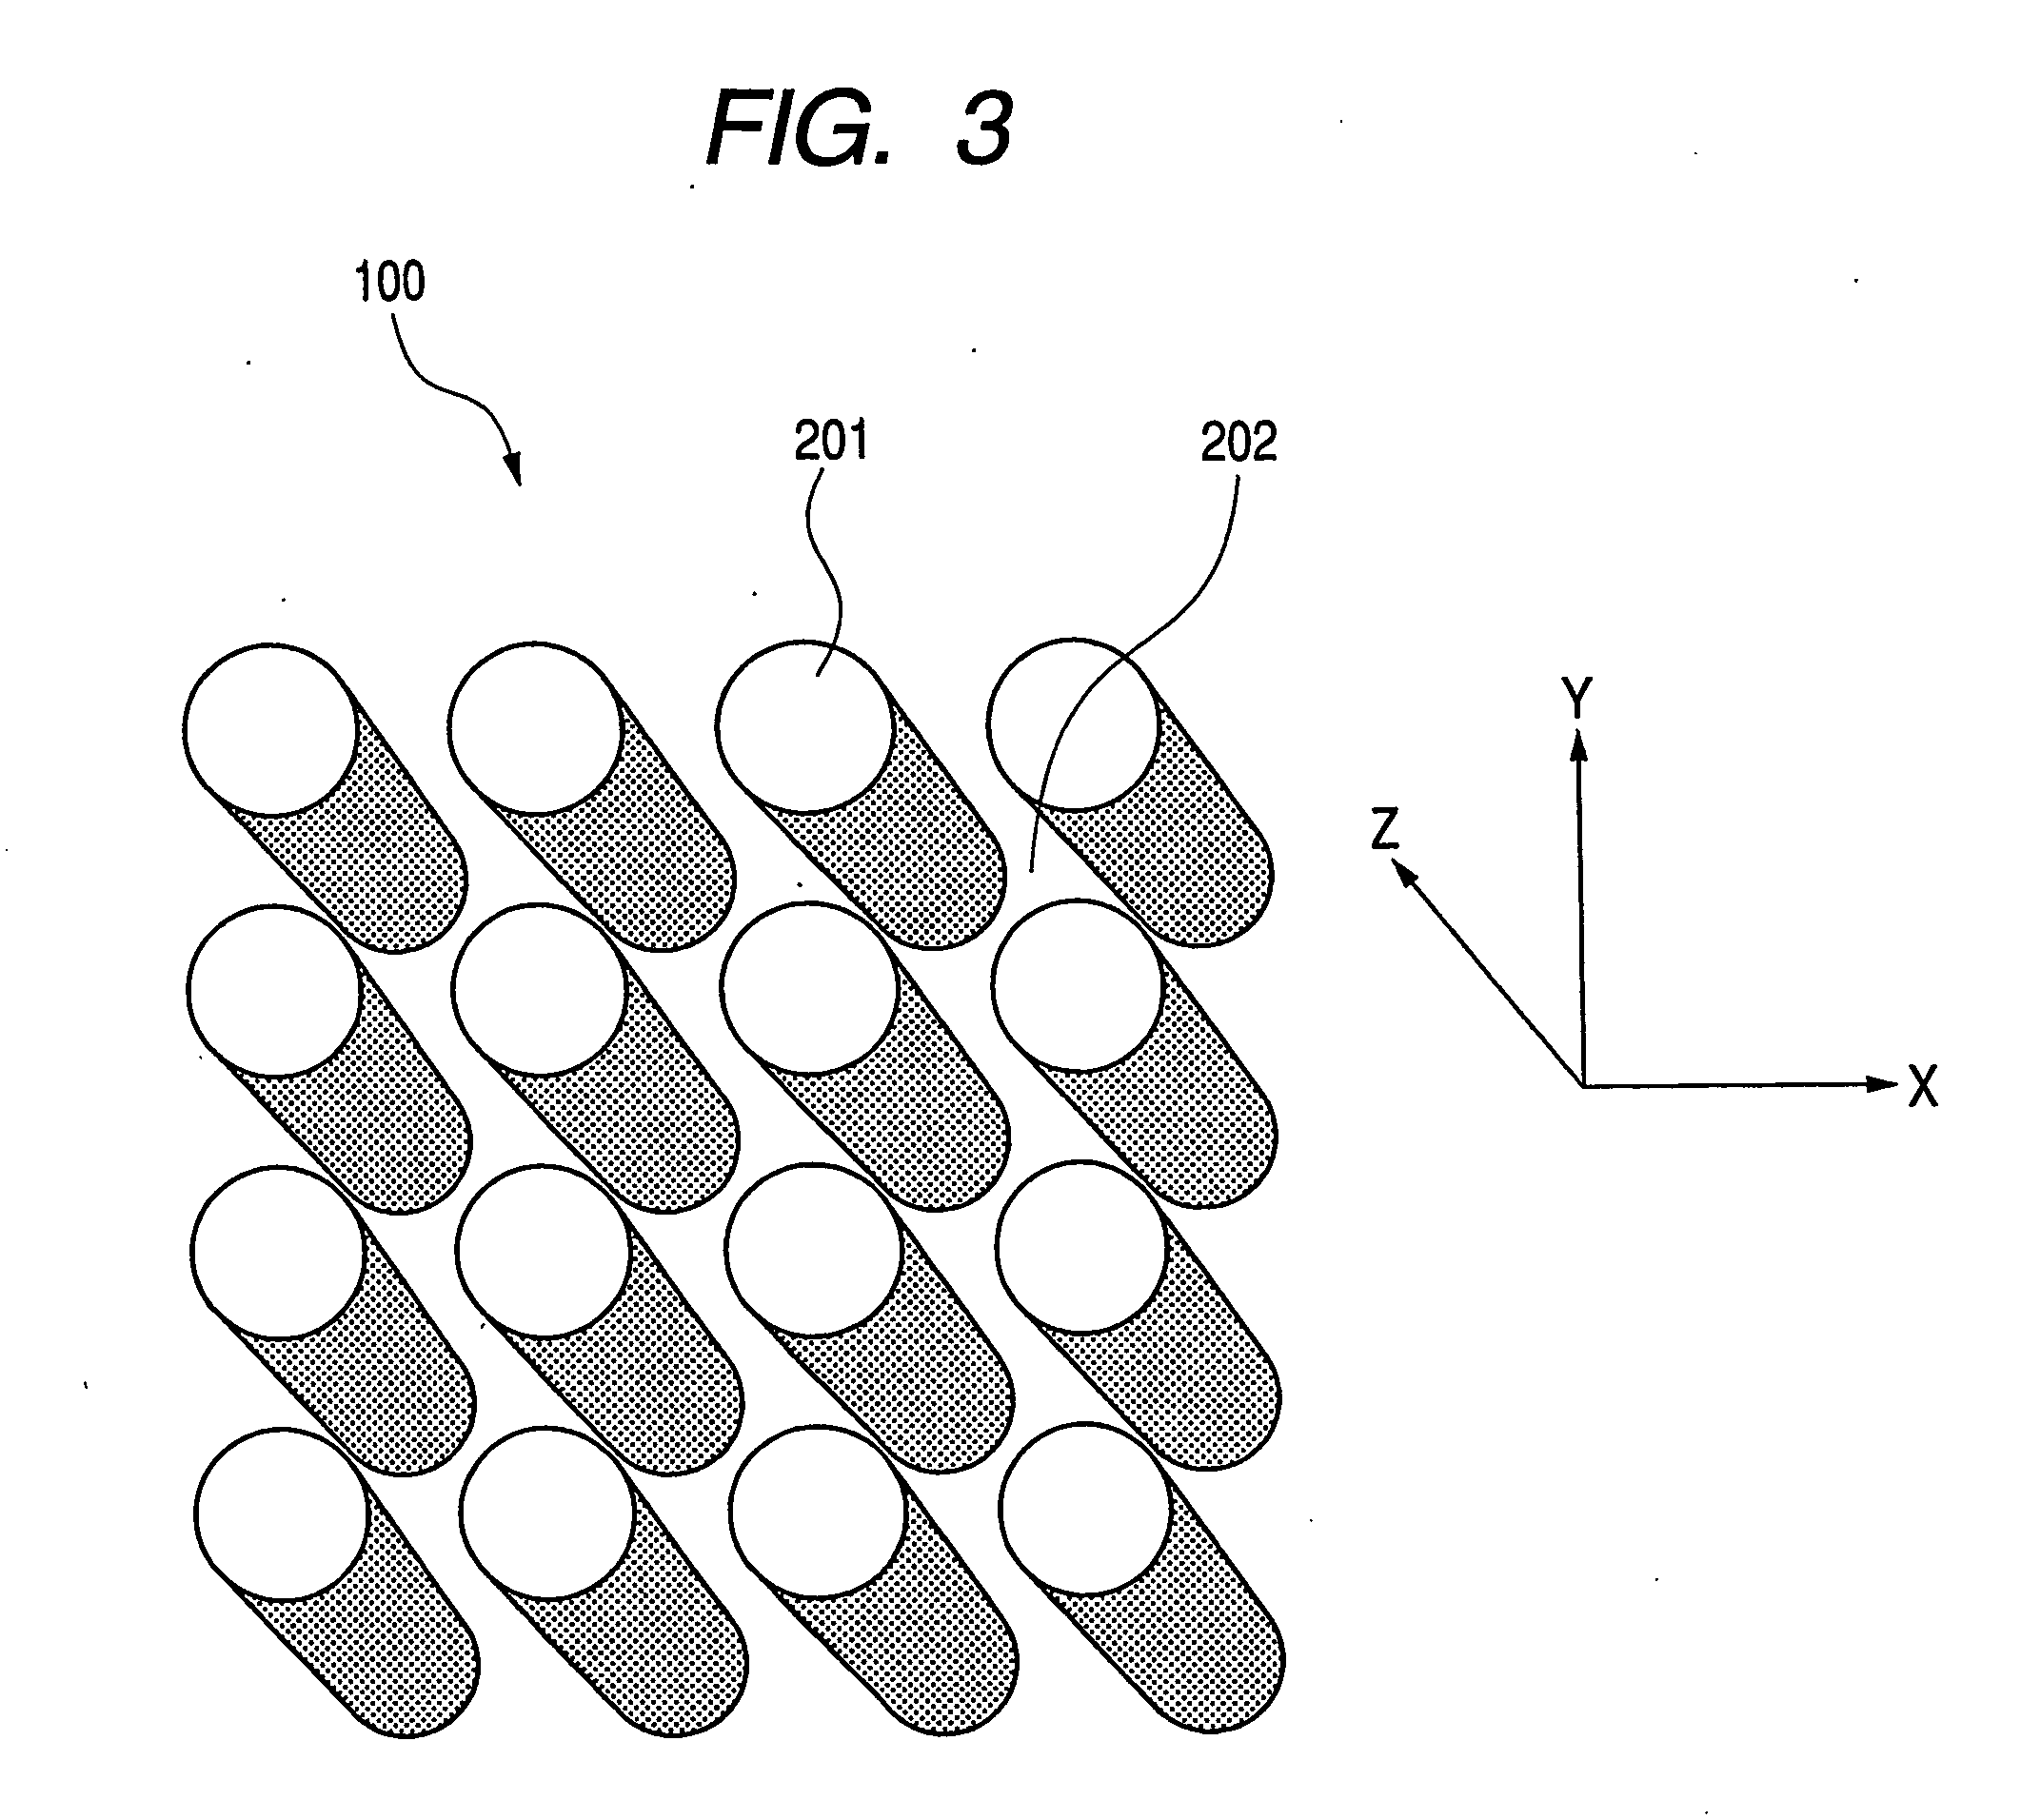 Sensor for detecting a target substance in a fluid